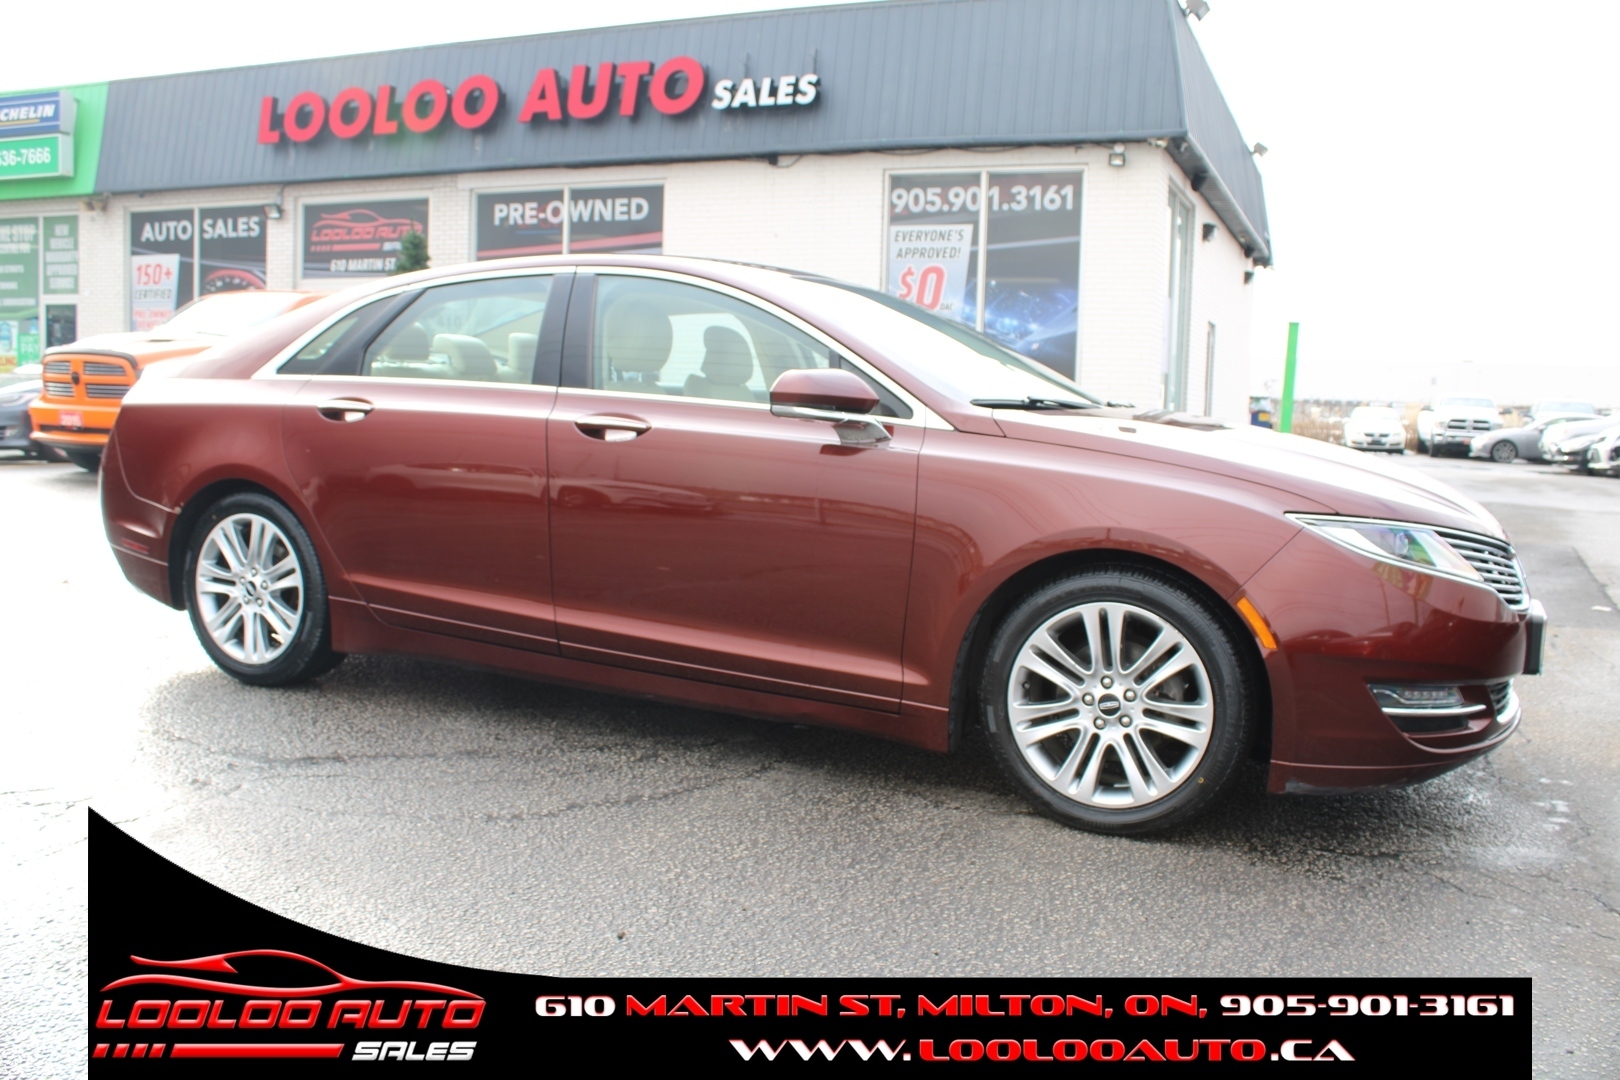 2015 Lincoln MKZ Sedan Camera Leather $89/Weekly Certified